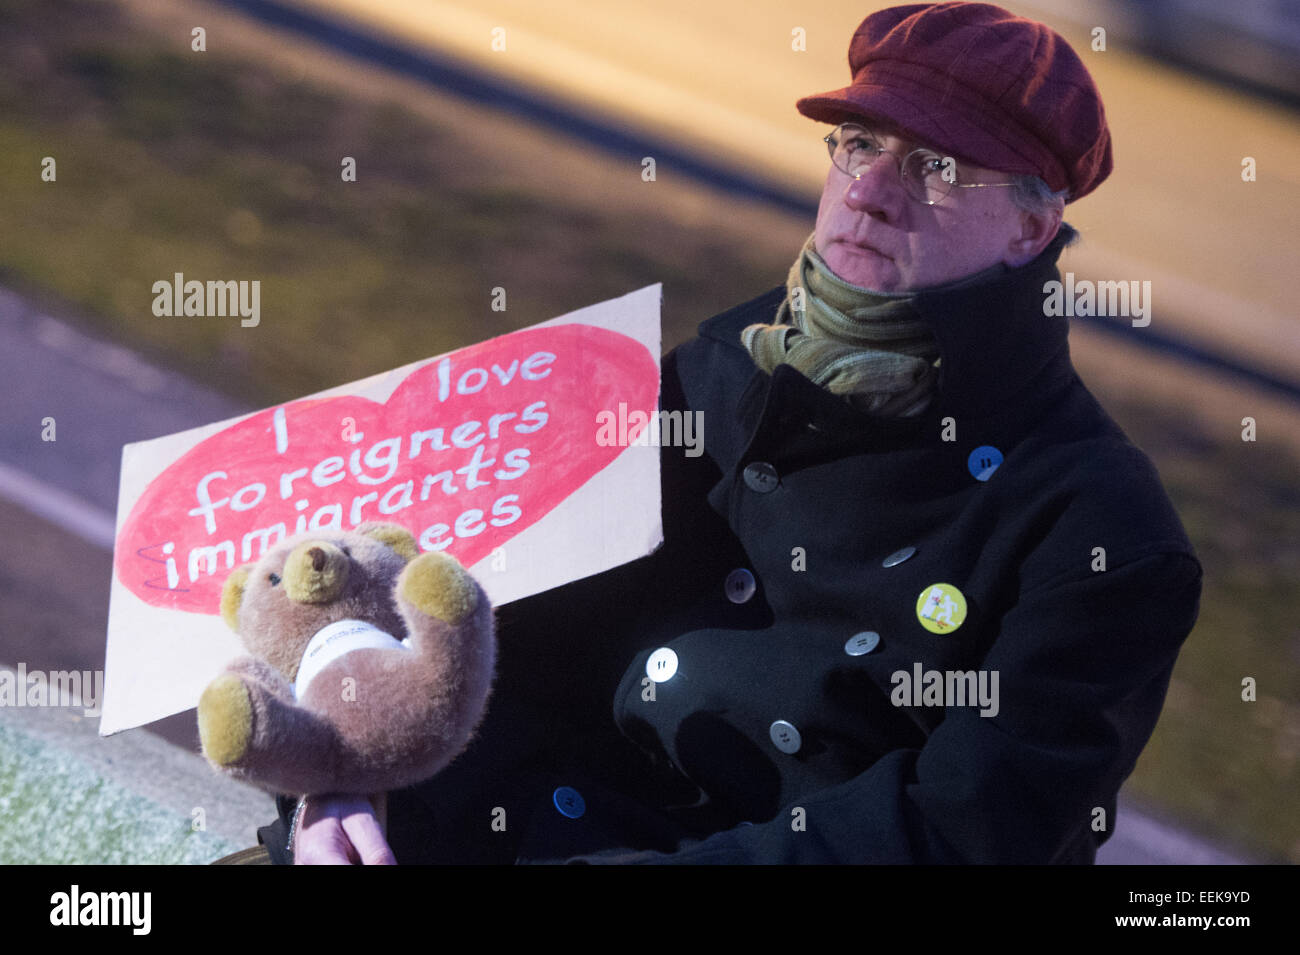 Berlin, Germany. 19th Jan, 2015. A counter-demonstrator protests against the Islam-critical movement 'Baergida' (Berliner Patriots against the Islamization of the West) with the slogan 'acting together against racist agitation and social exclusion' at the federal chancellery in Berlin, Germany, 19 January 2015. Photo: MAURIZIO GAMBARINI/dpa/Alamy Live News Stock Photo